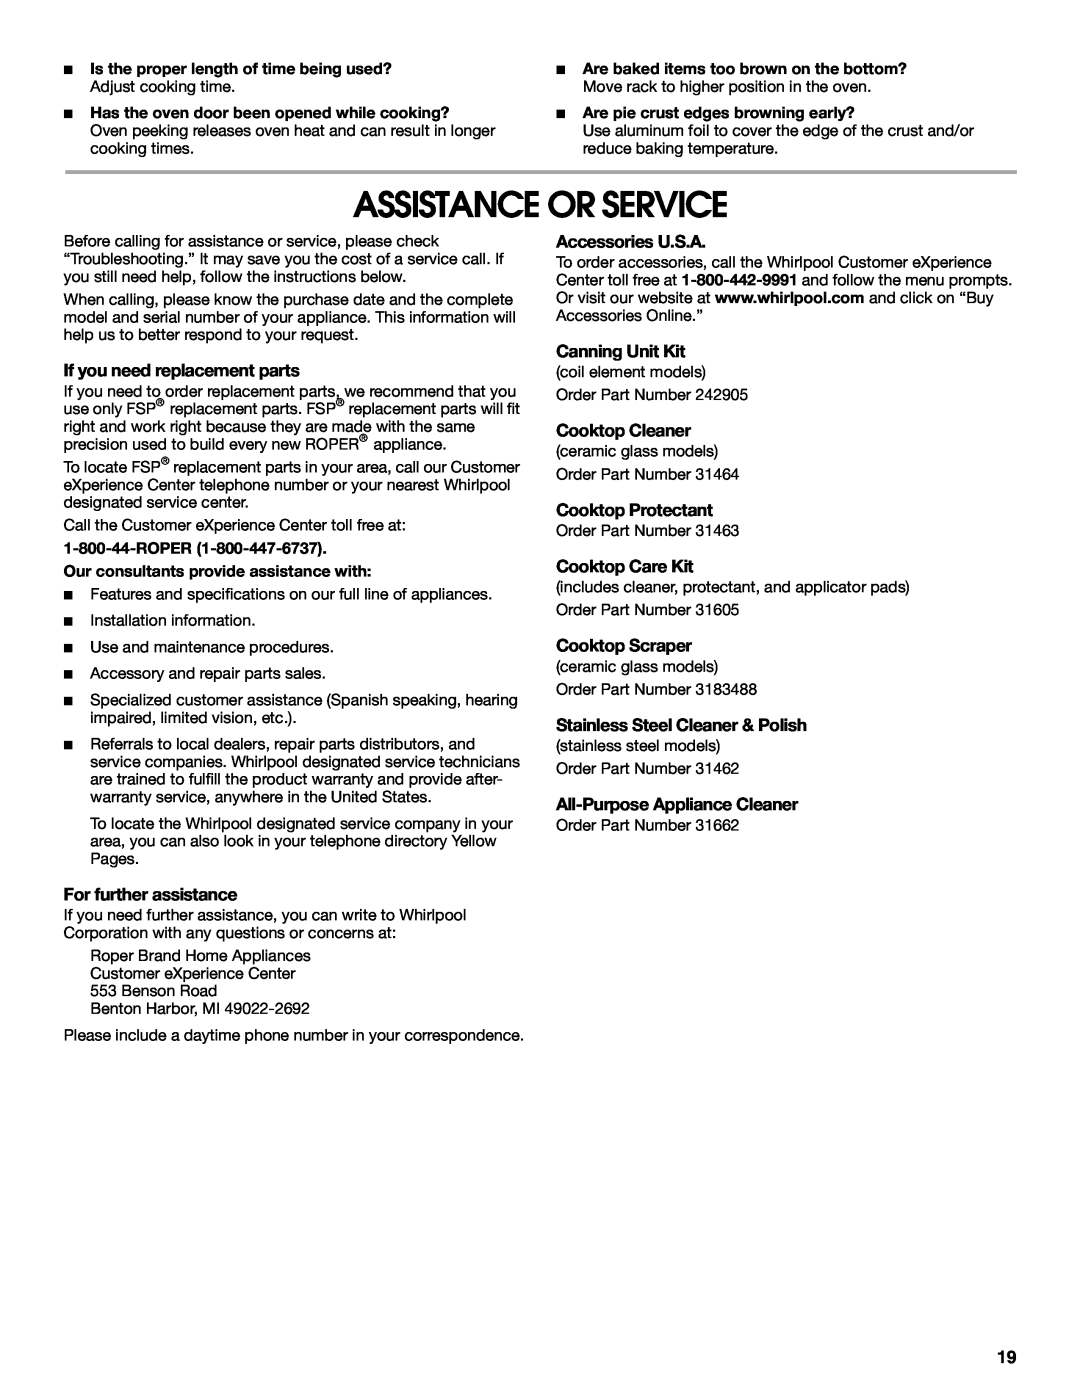 Whirlpool FES325RQ1 manual Assistance Or Service, If you need replacement parts, Accessories U.S.A, Canning Unit Kit 